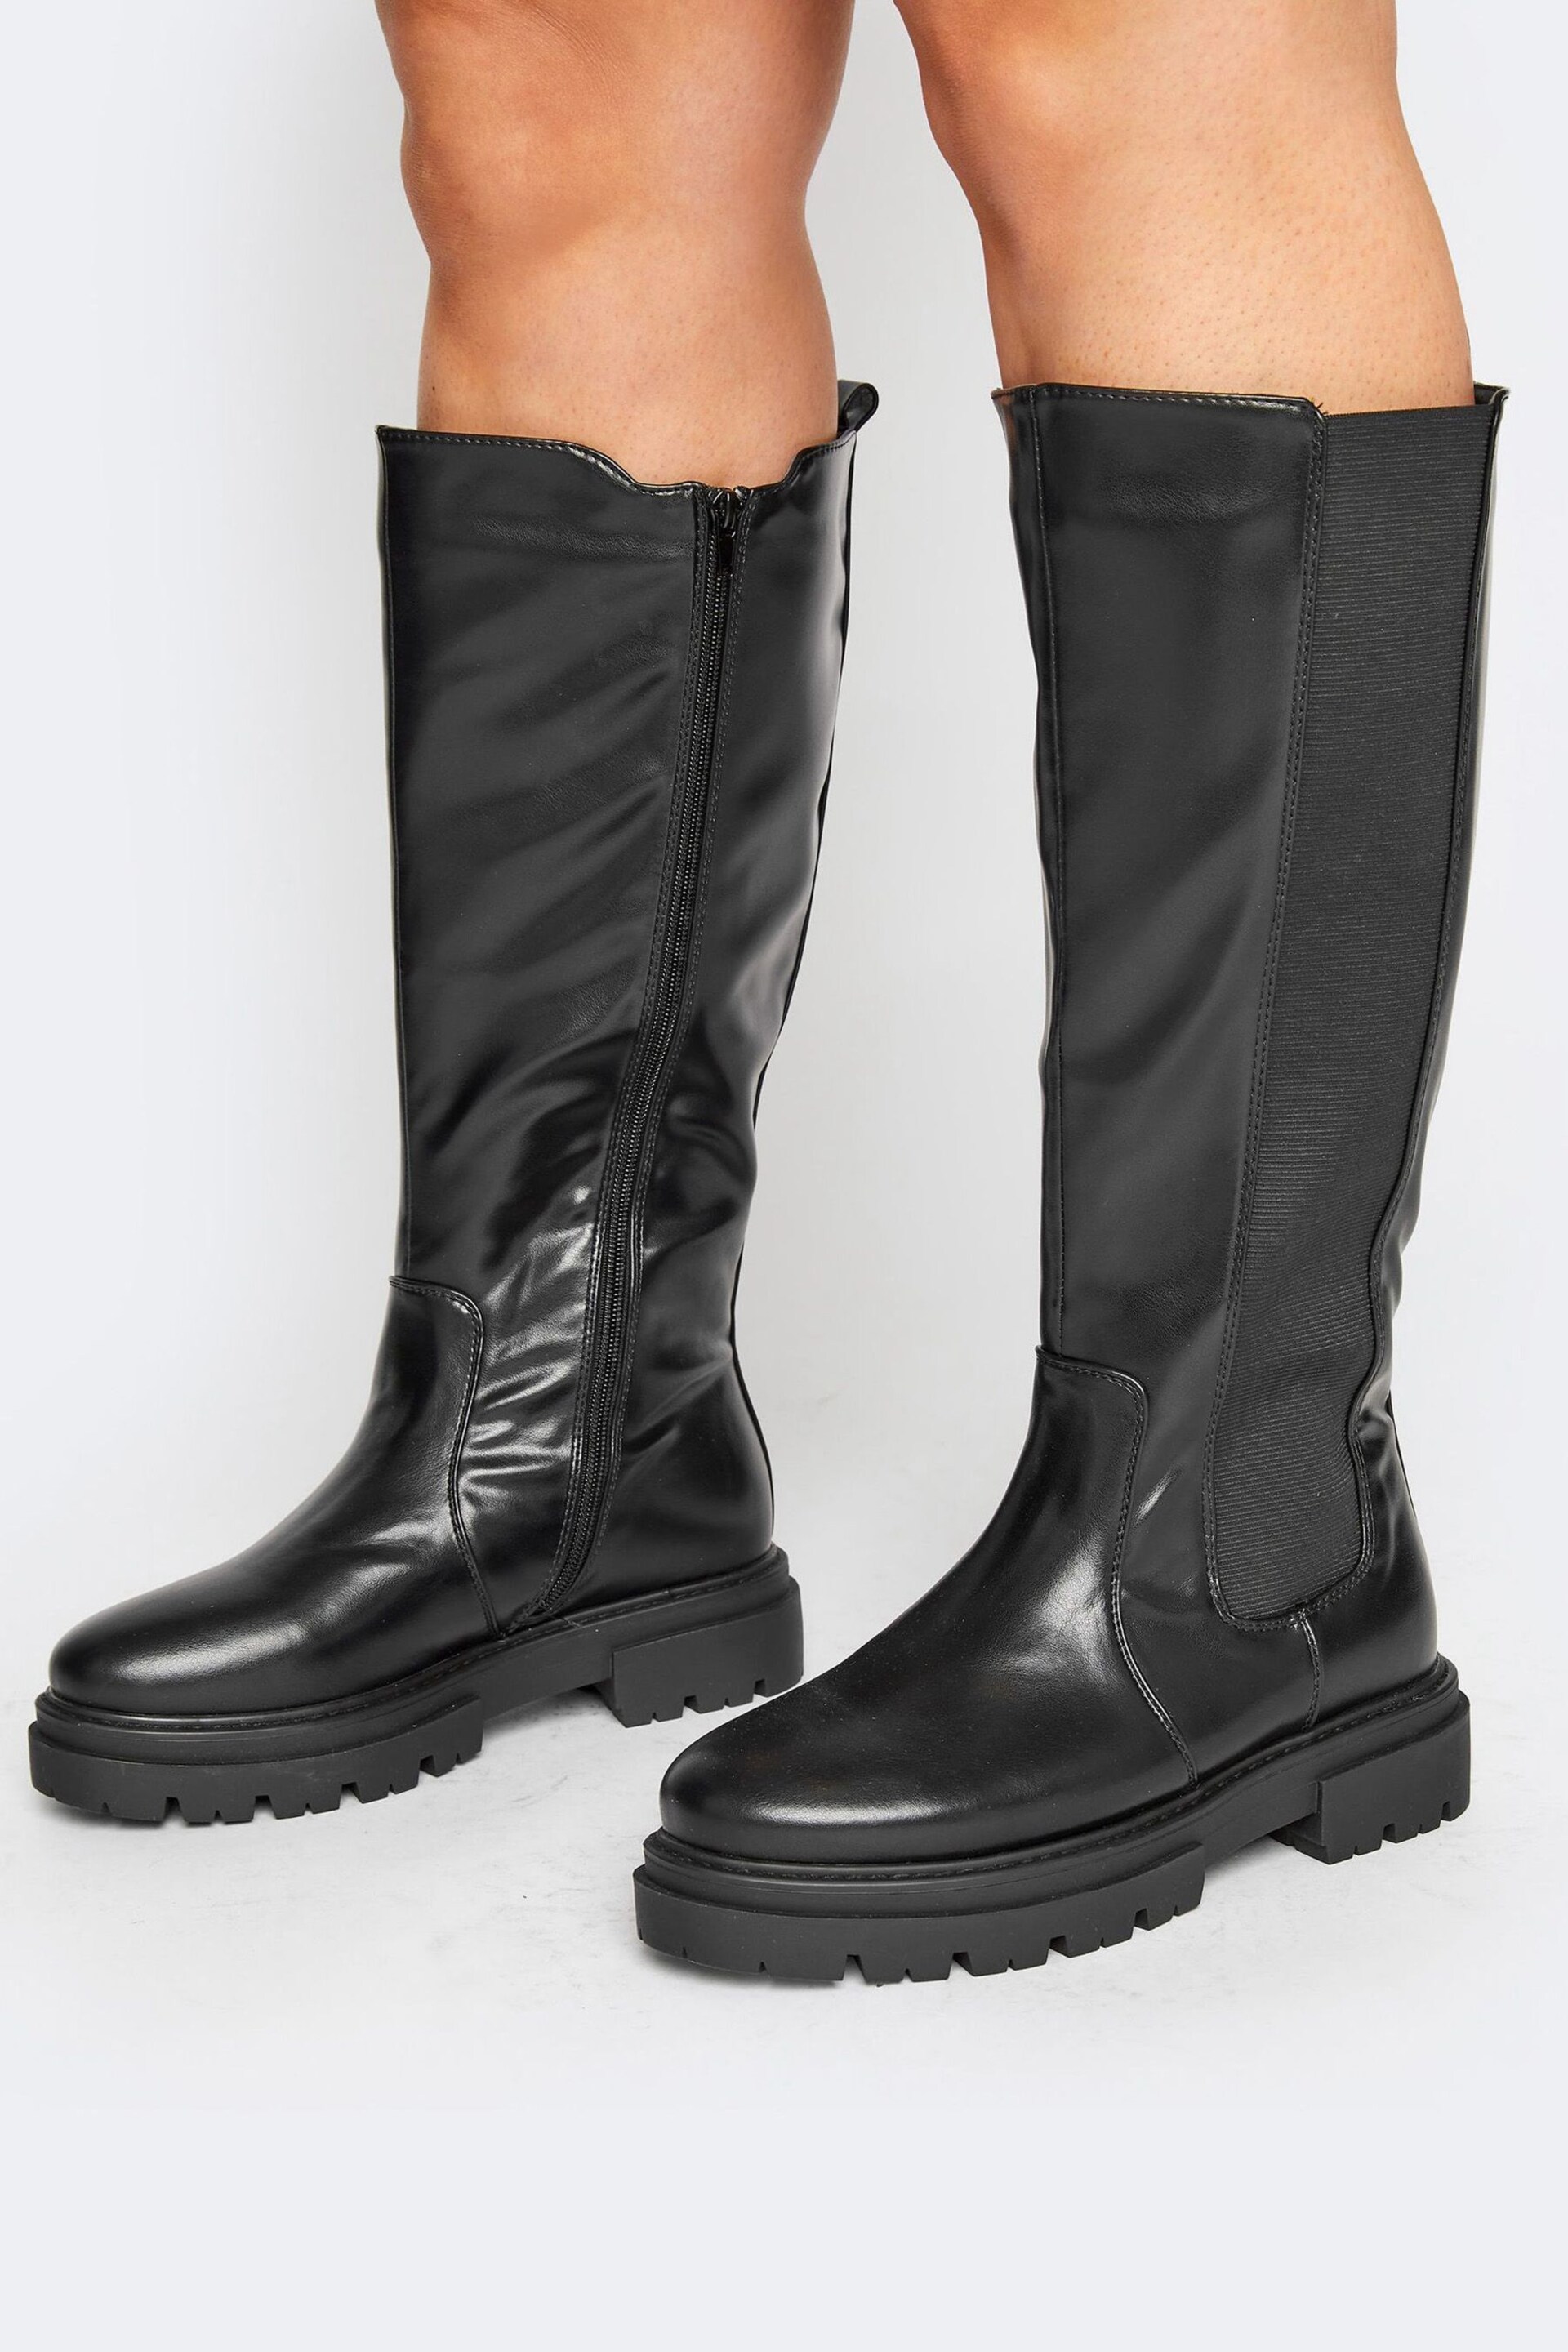 Yours Curve Black Wide Fit Elastic Knee Cleated Boots - Image 1 of 4